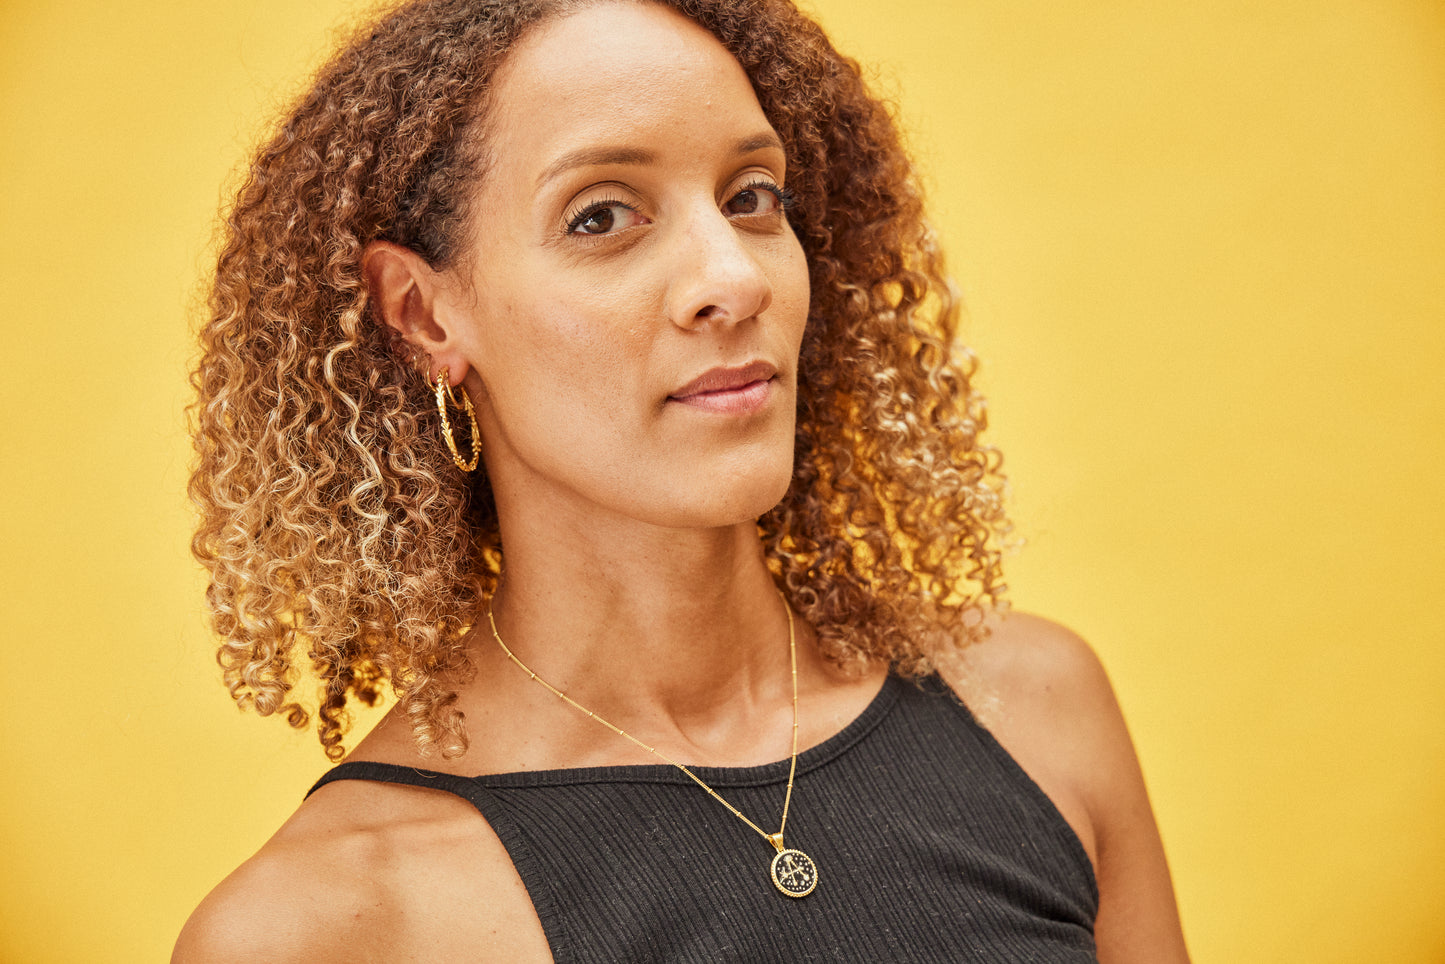 image of diamond sparkler initial necklace, letter A on short chain, on model with curly brown hair and brown skin against yellow background